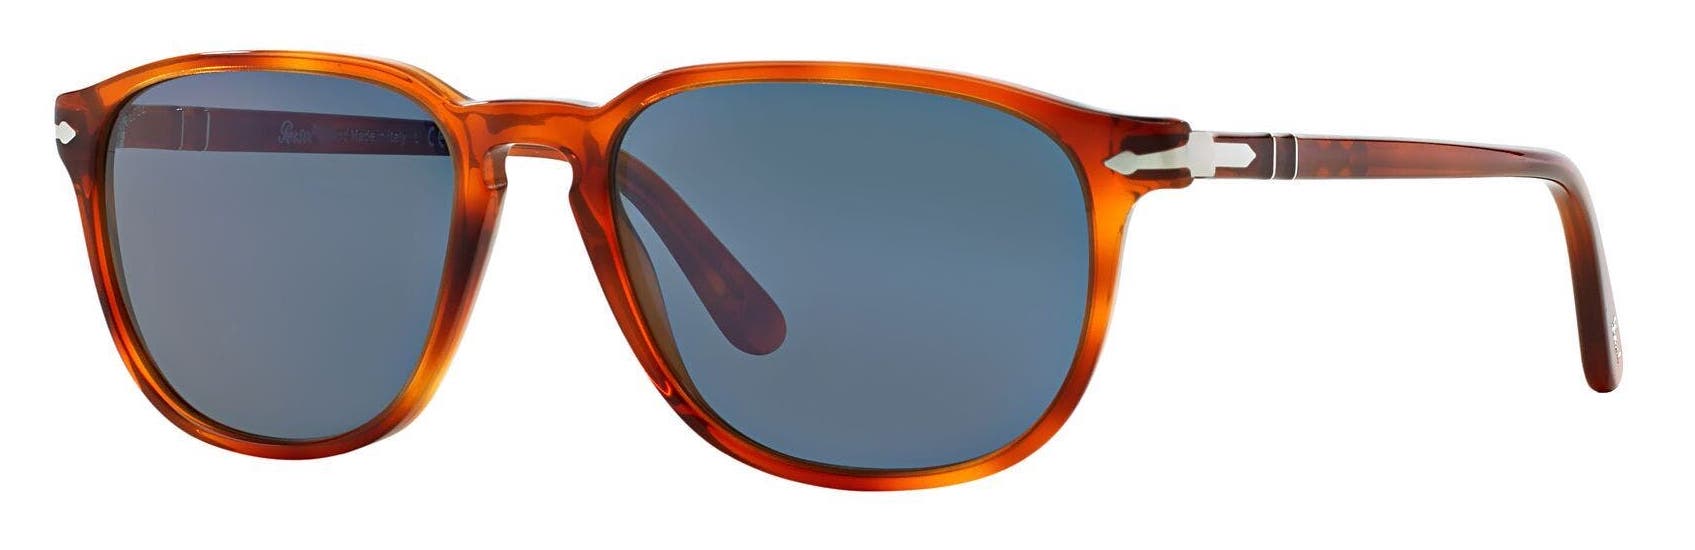 Persol PO3019S men's lifestyle sunglasses in brown sienna color with blue square lenses.